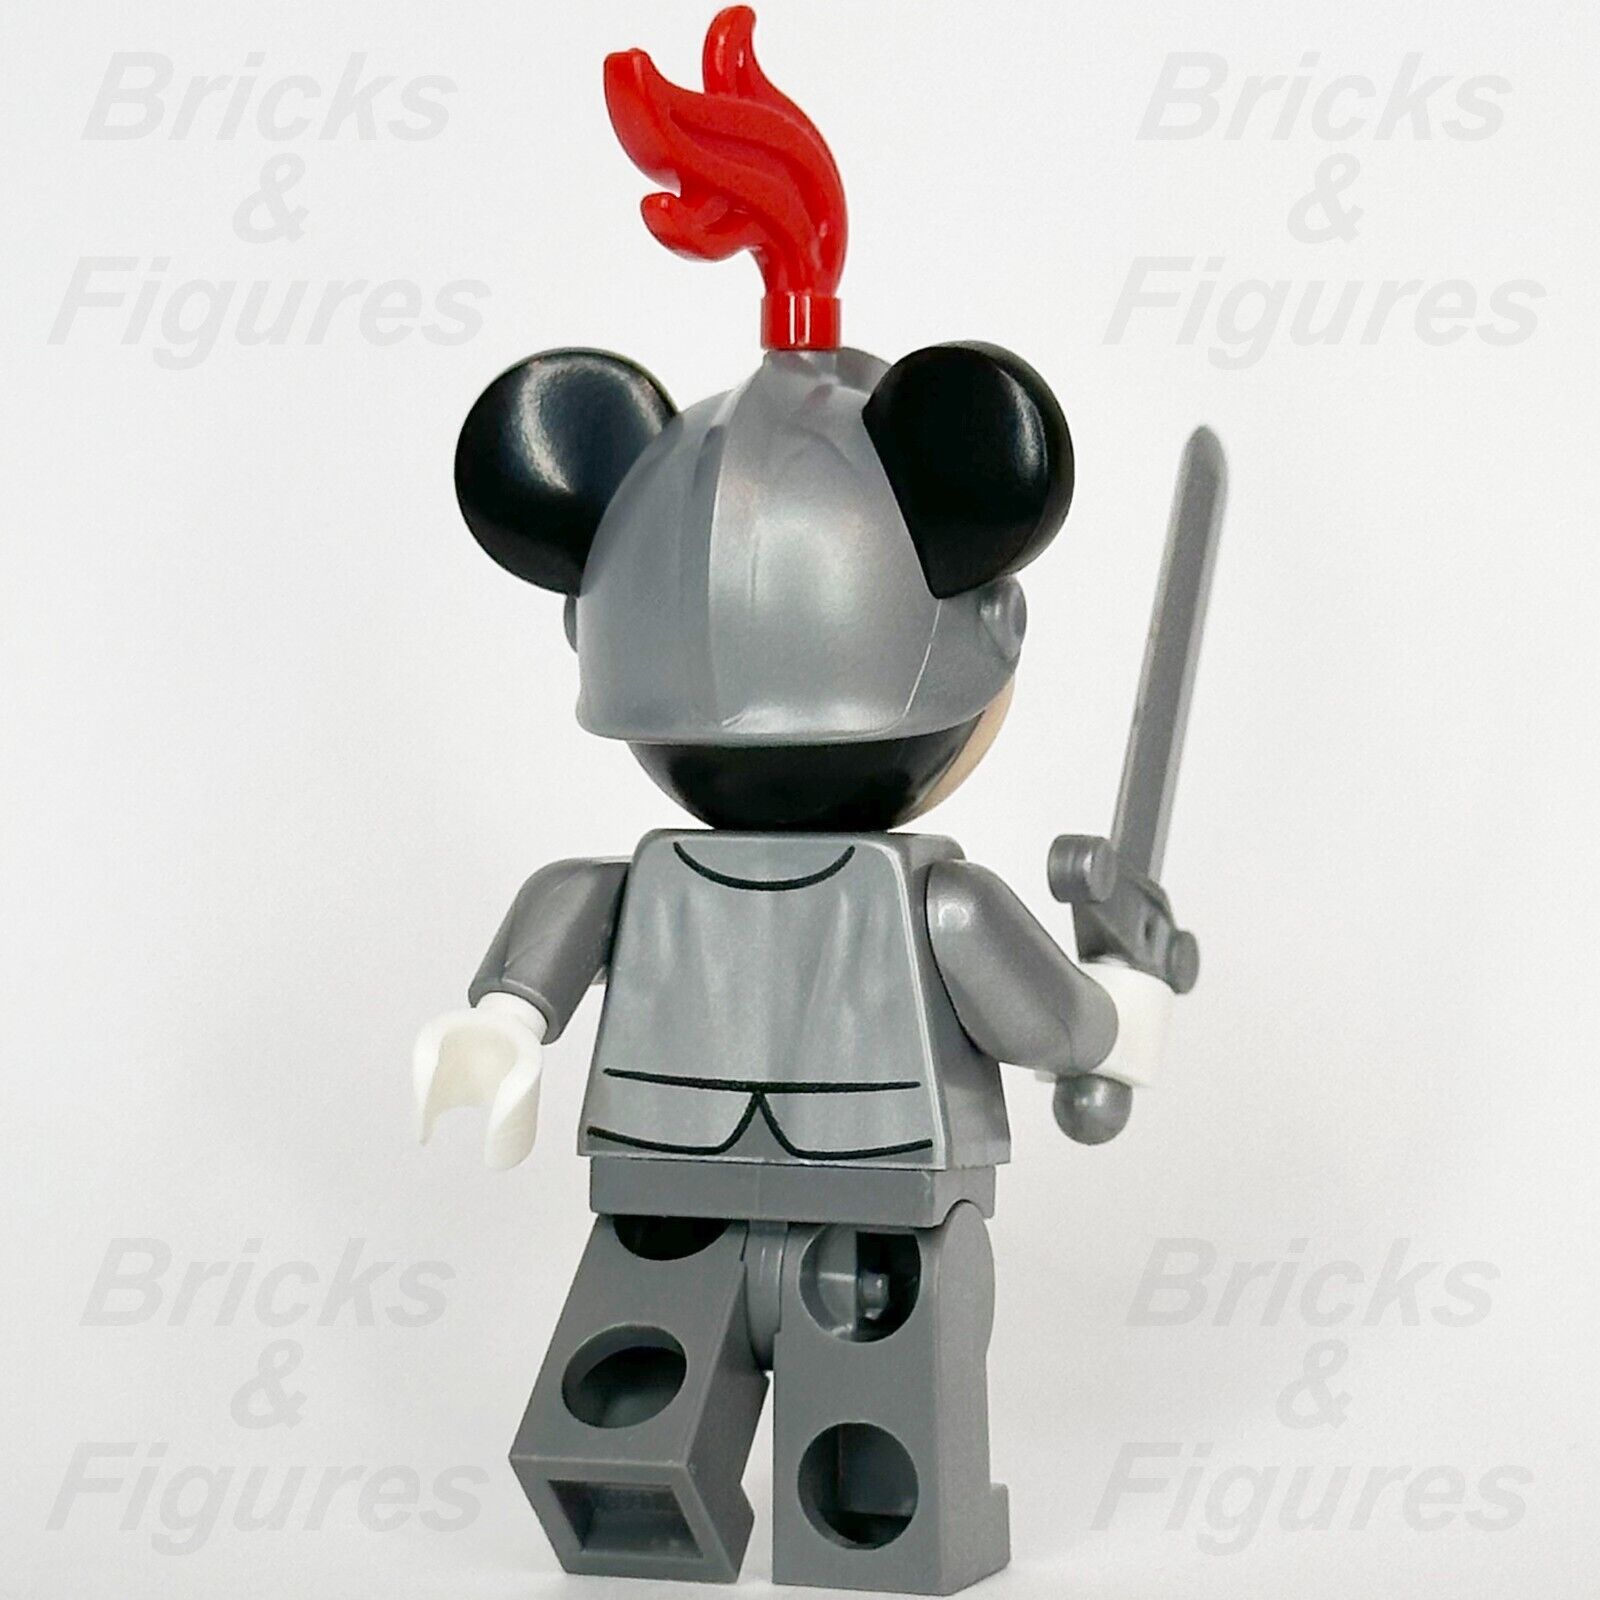 LEGO Disney Mickey Mouse Knight Minifigure Mickey and Friends 10780 dis078 - Bricks & Figures